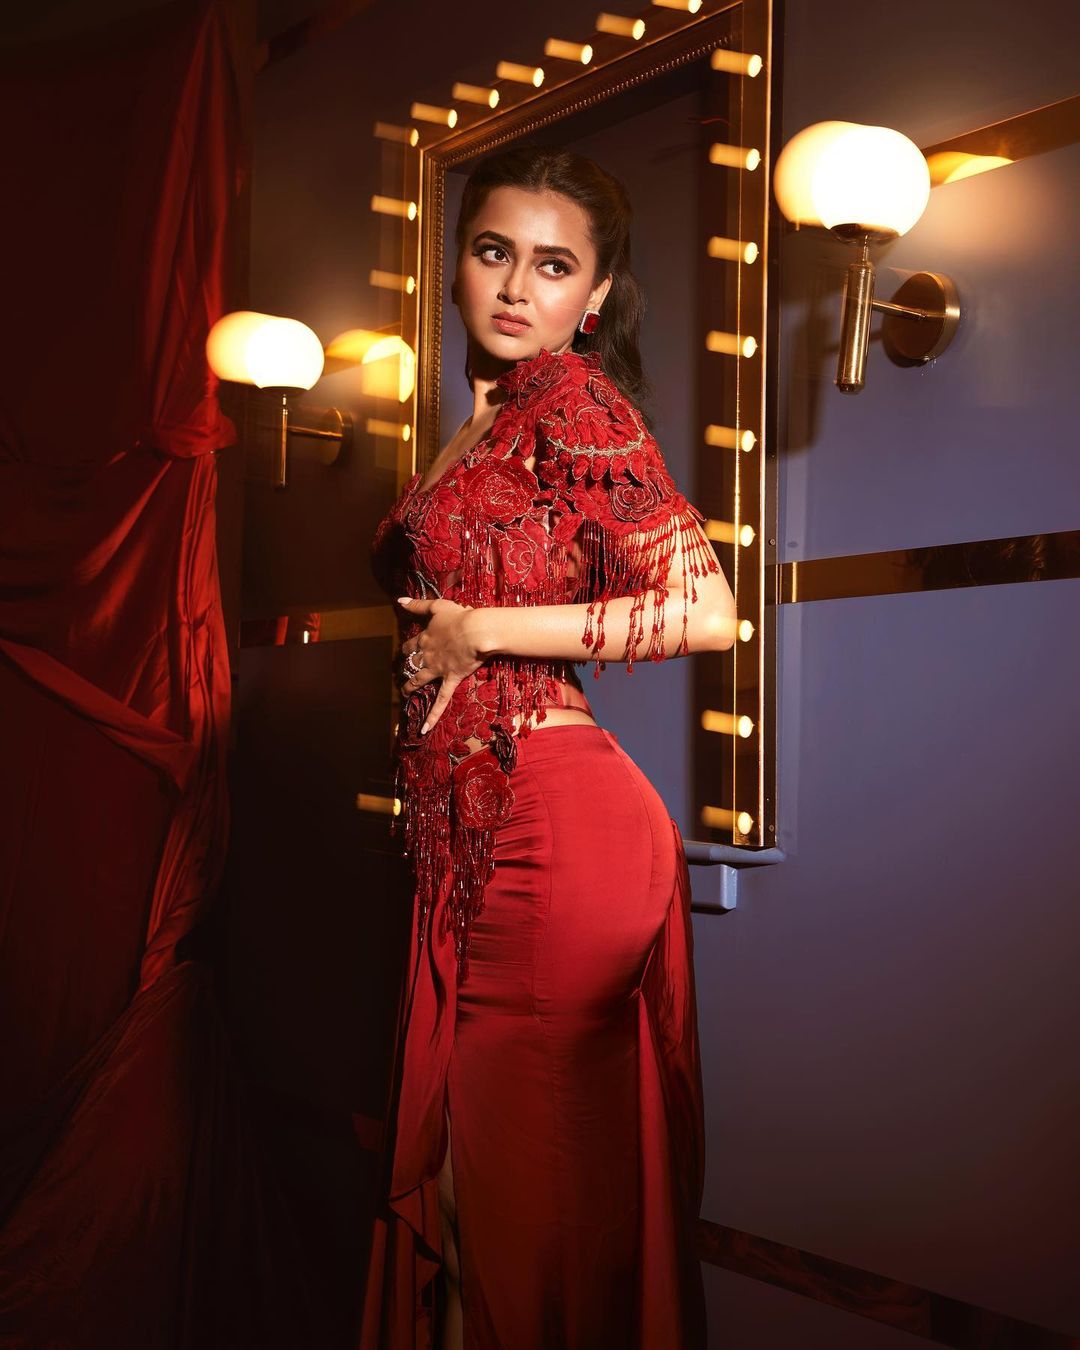 Hot Sexy Tejasswi Prakash Flaunt Body In Red Dress Shows Body Parts In